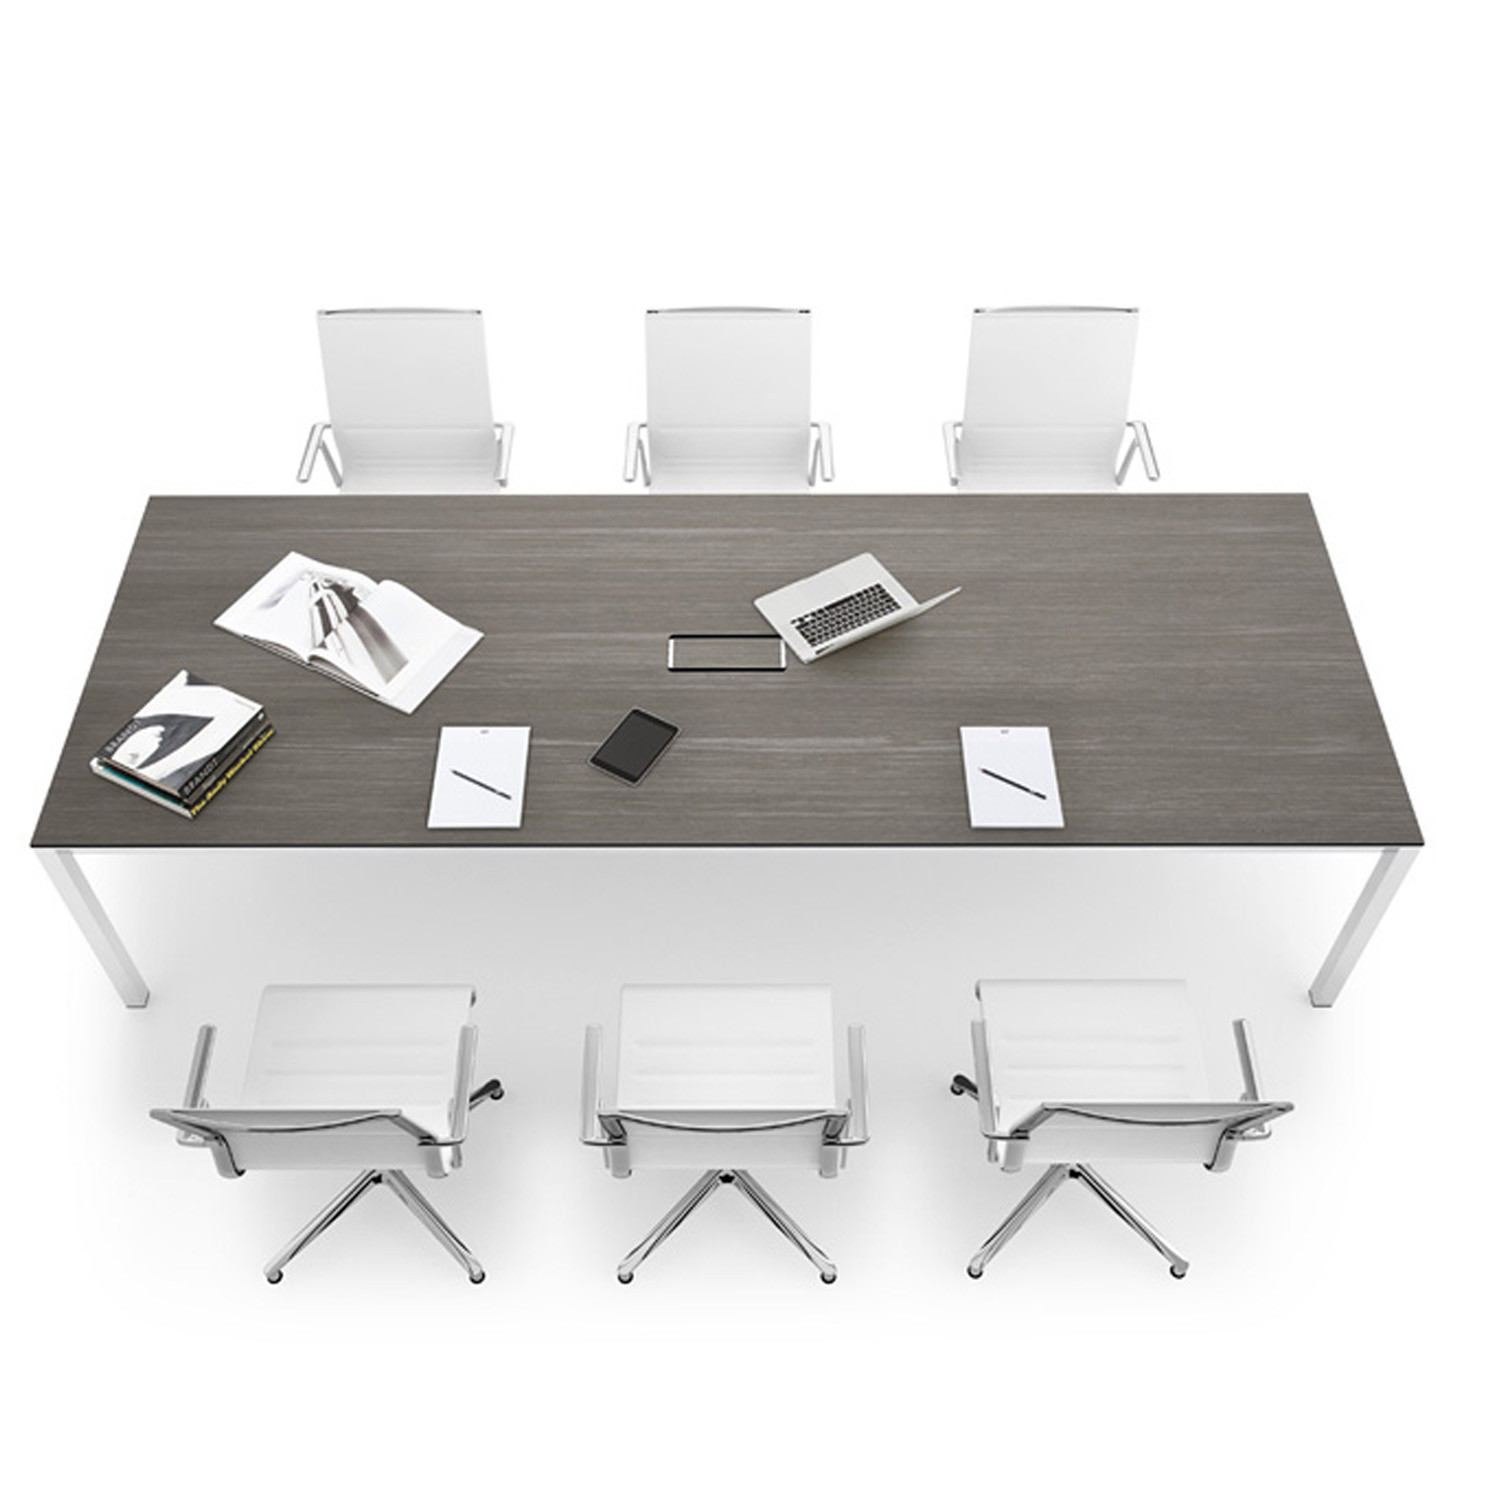 P50 Meeting Tables